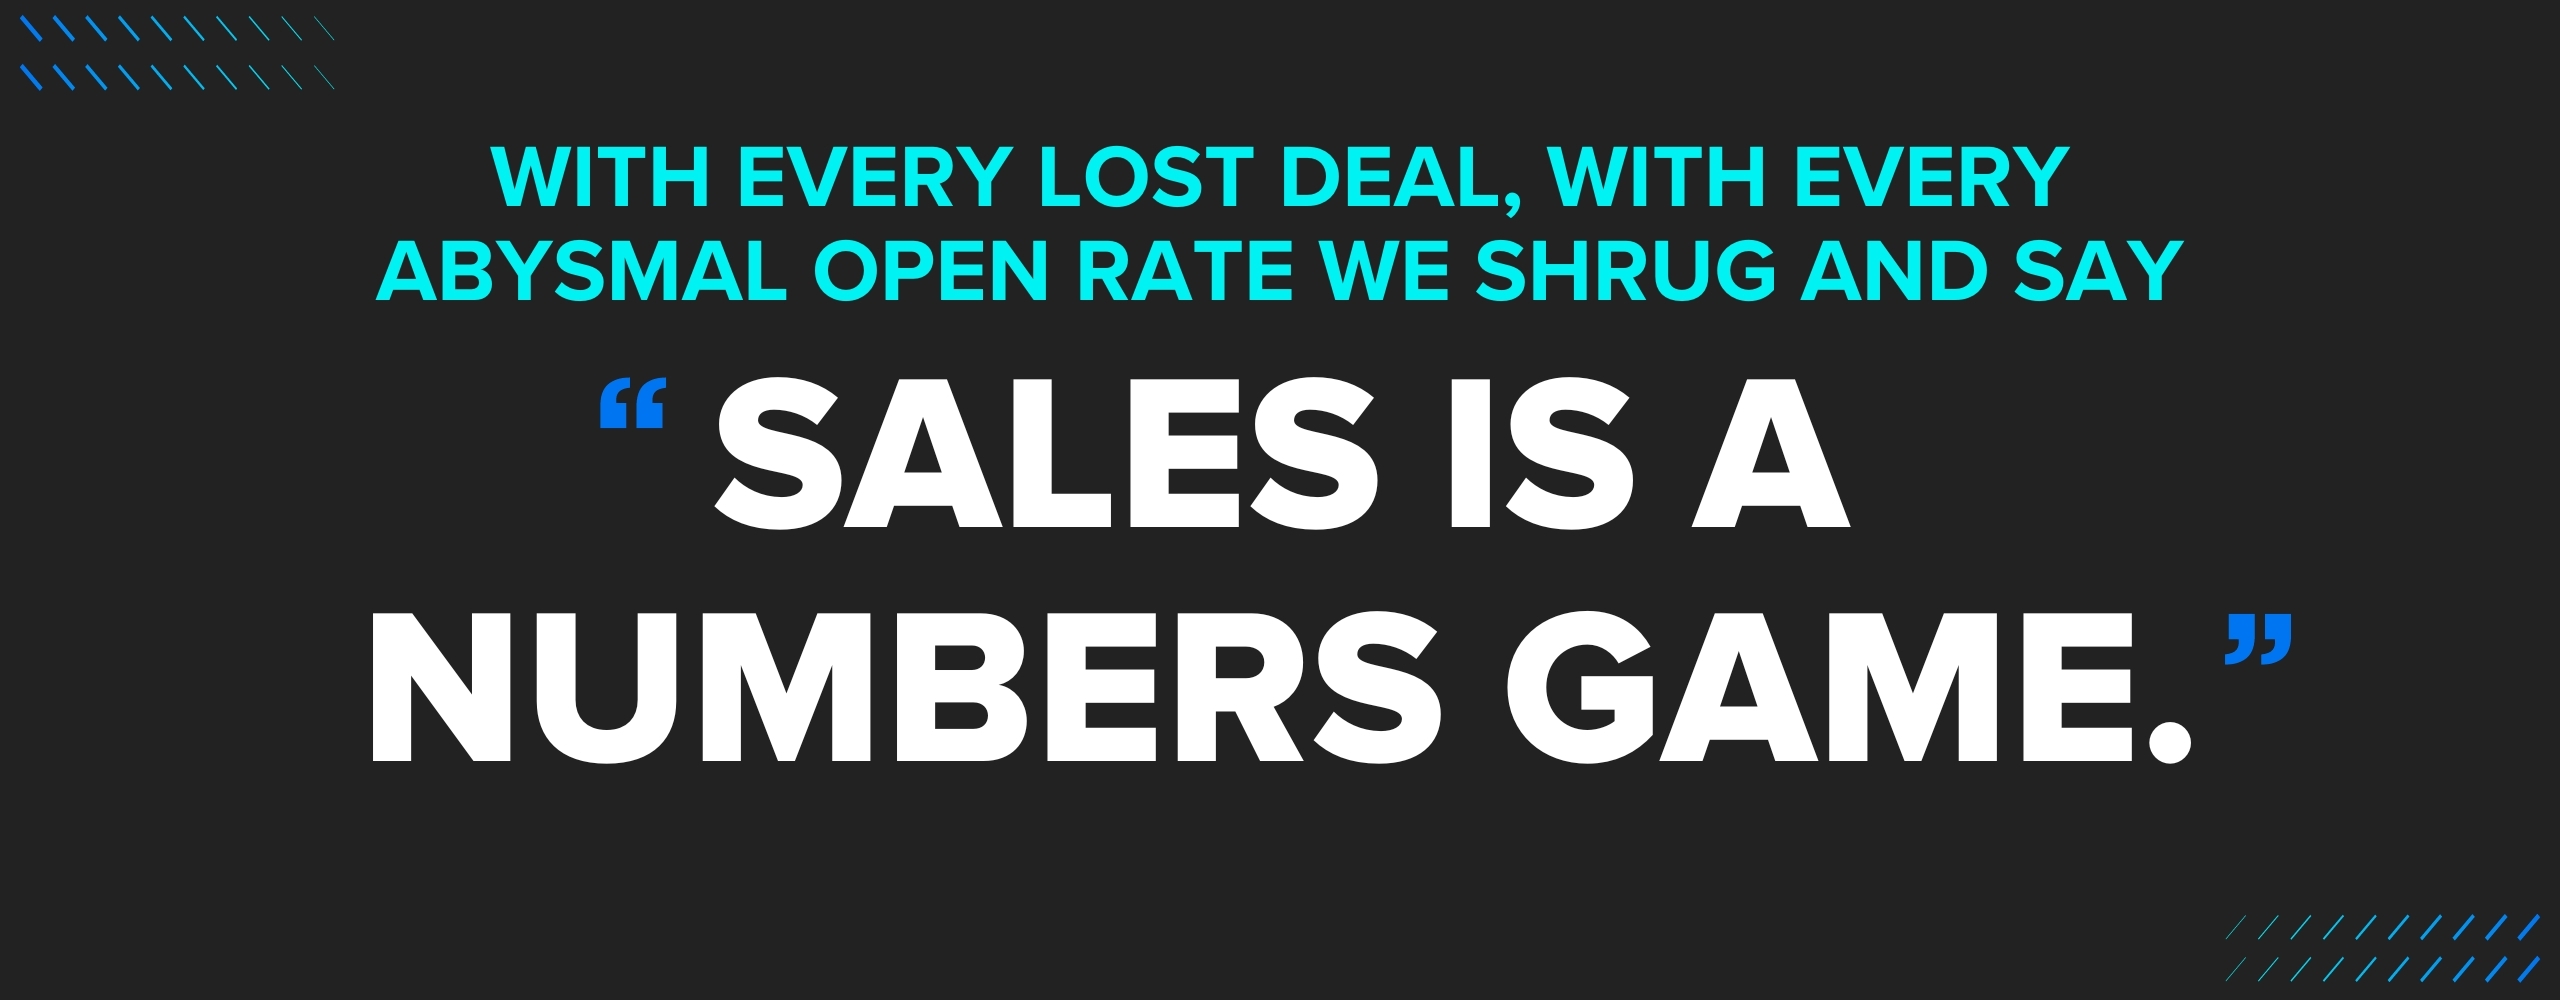 sales-is-a-numbers-game-myth